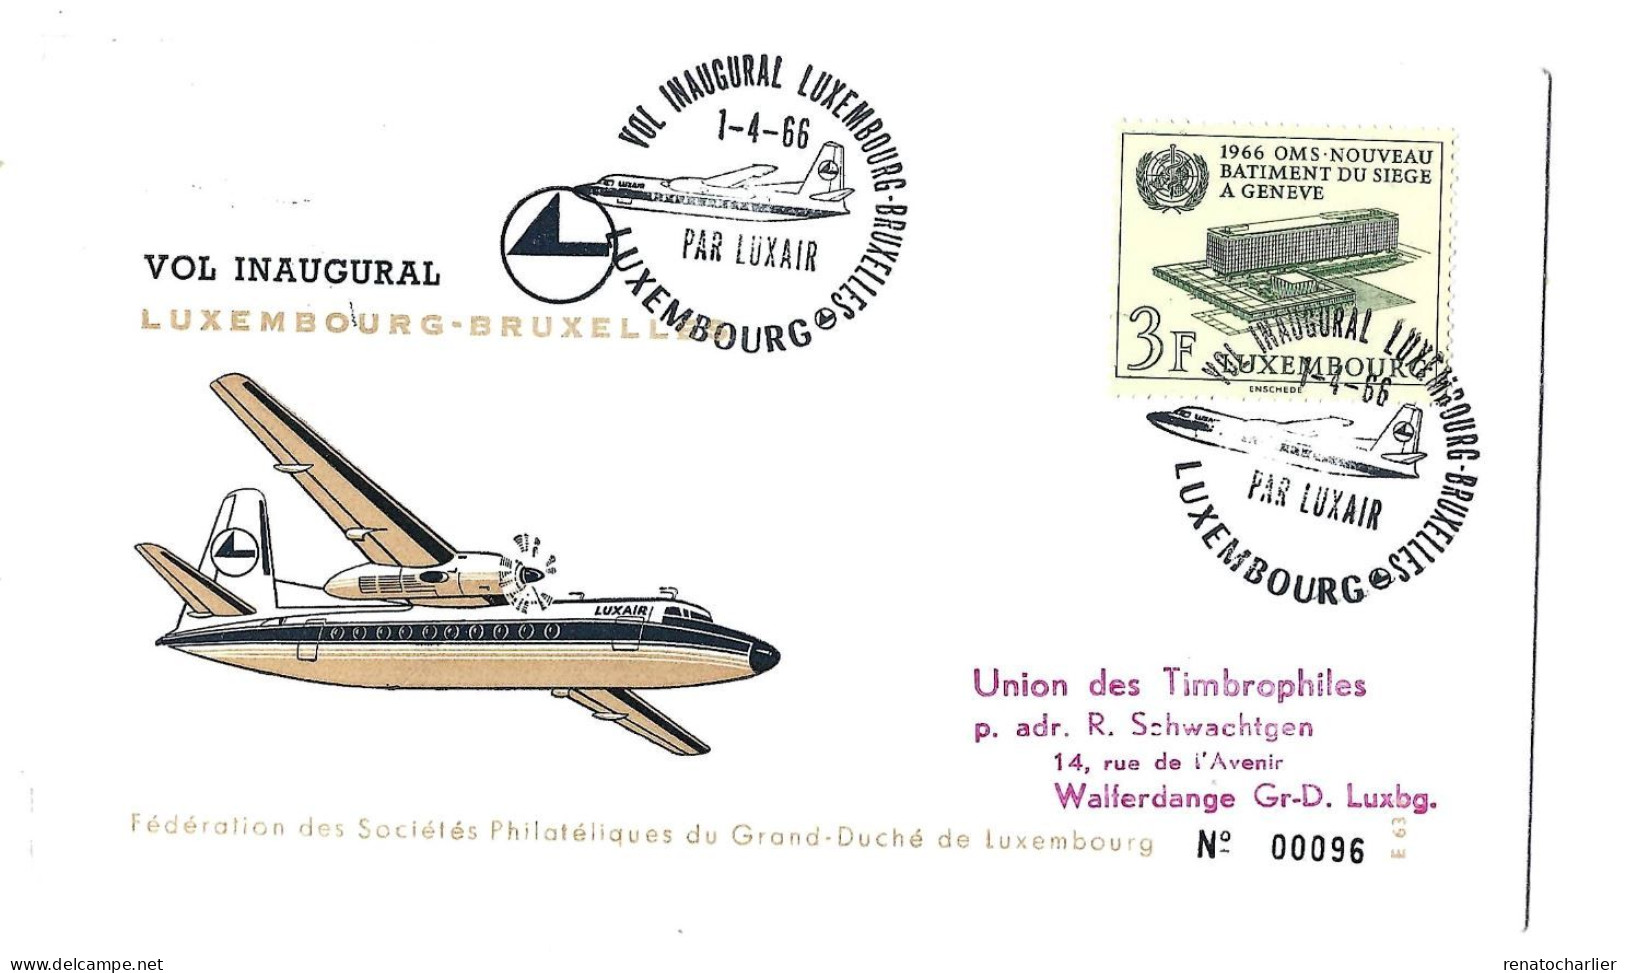 Vol Inaugural Luxembourg-Bruxelles.Luxair.1966. - Covers & Documents